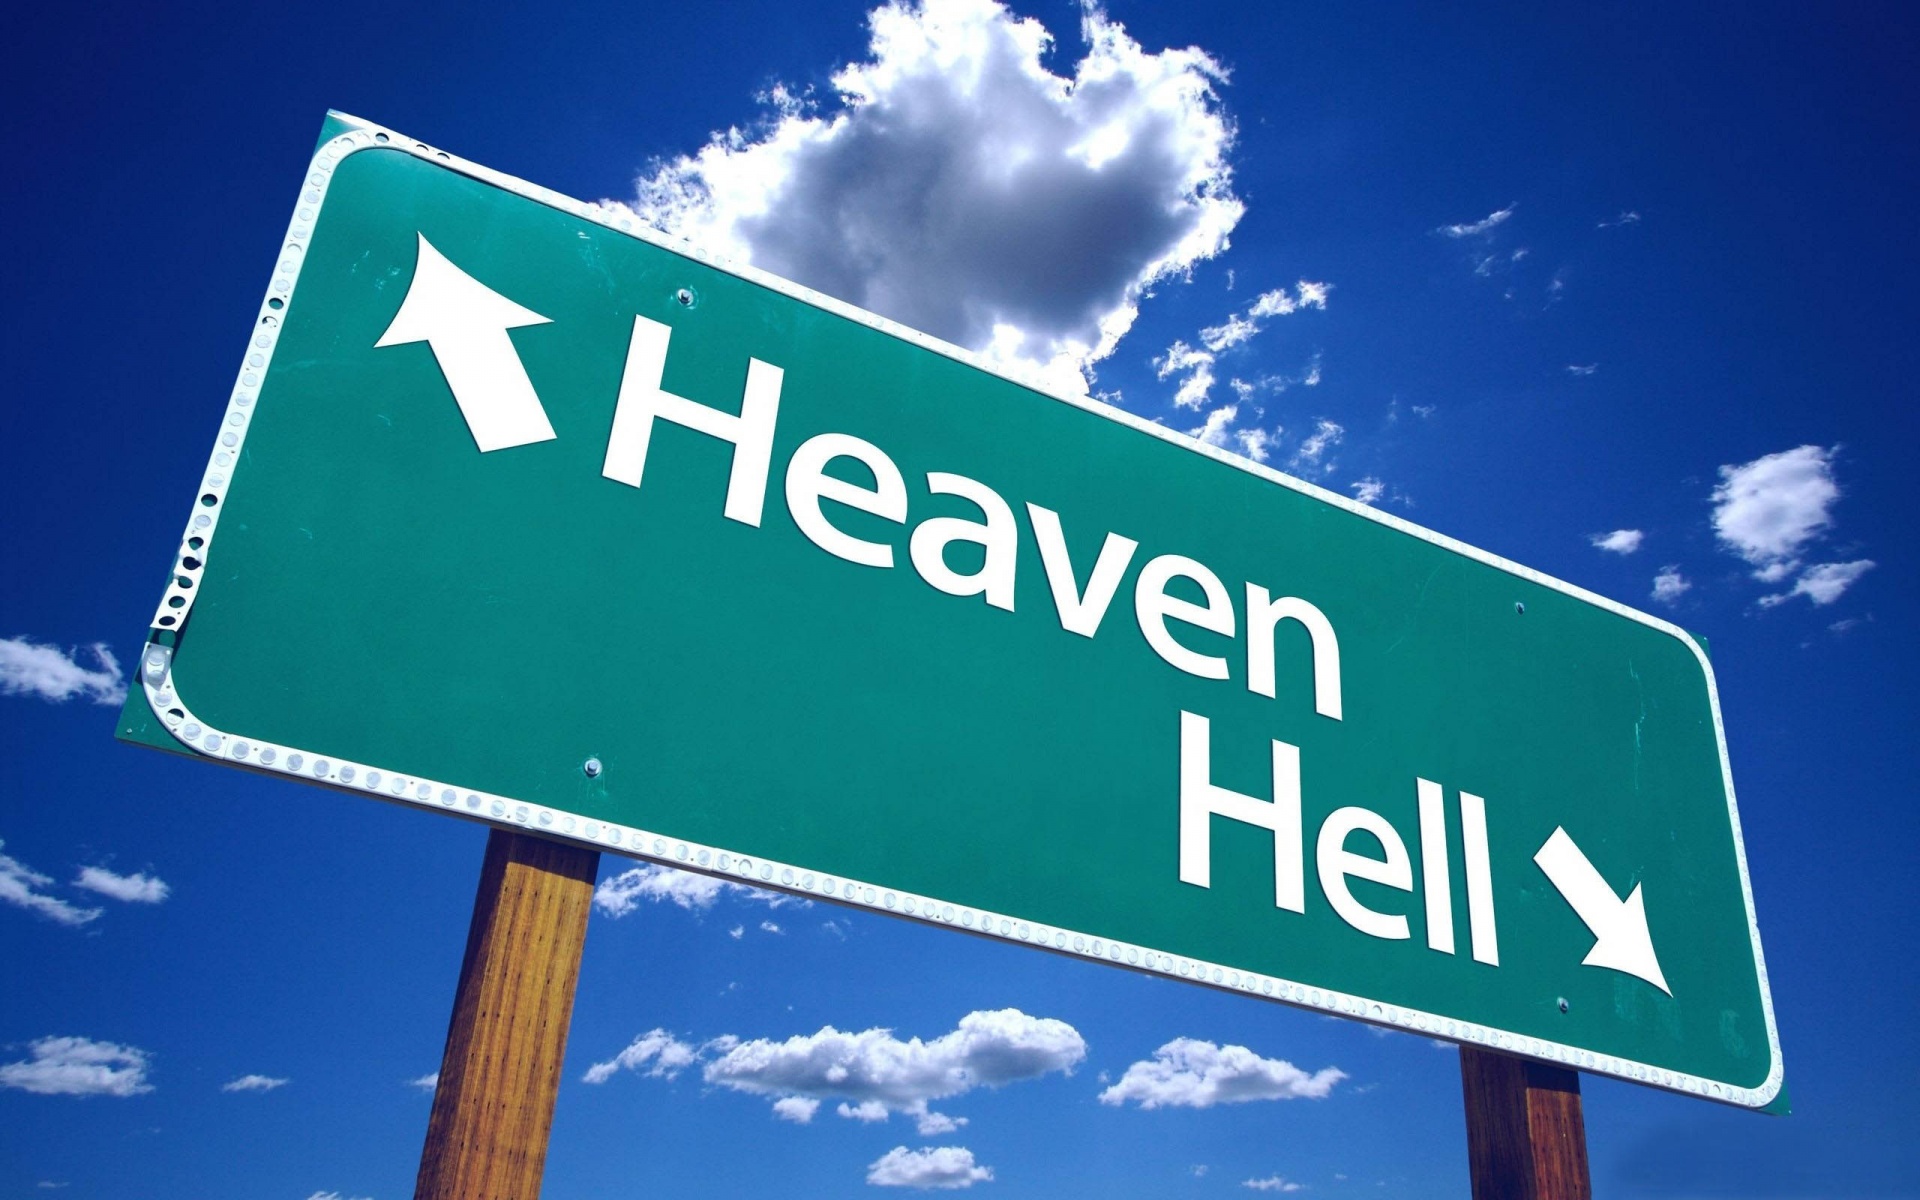 Heaven And Hell Sign